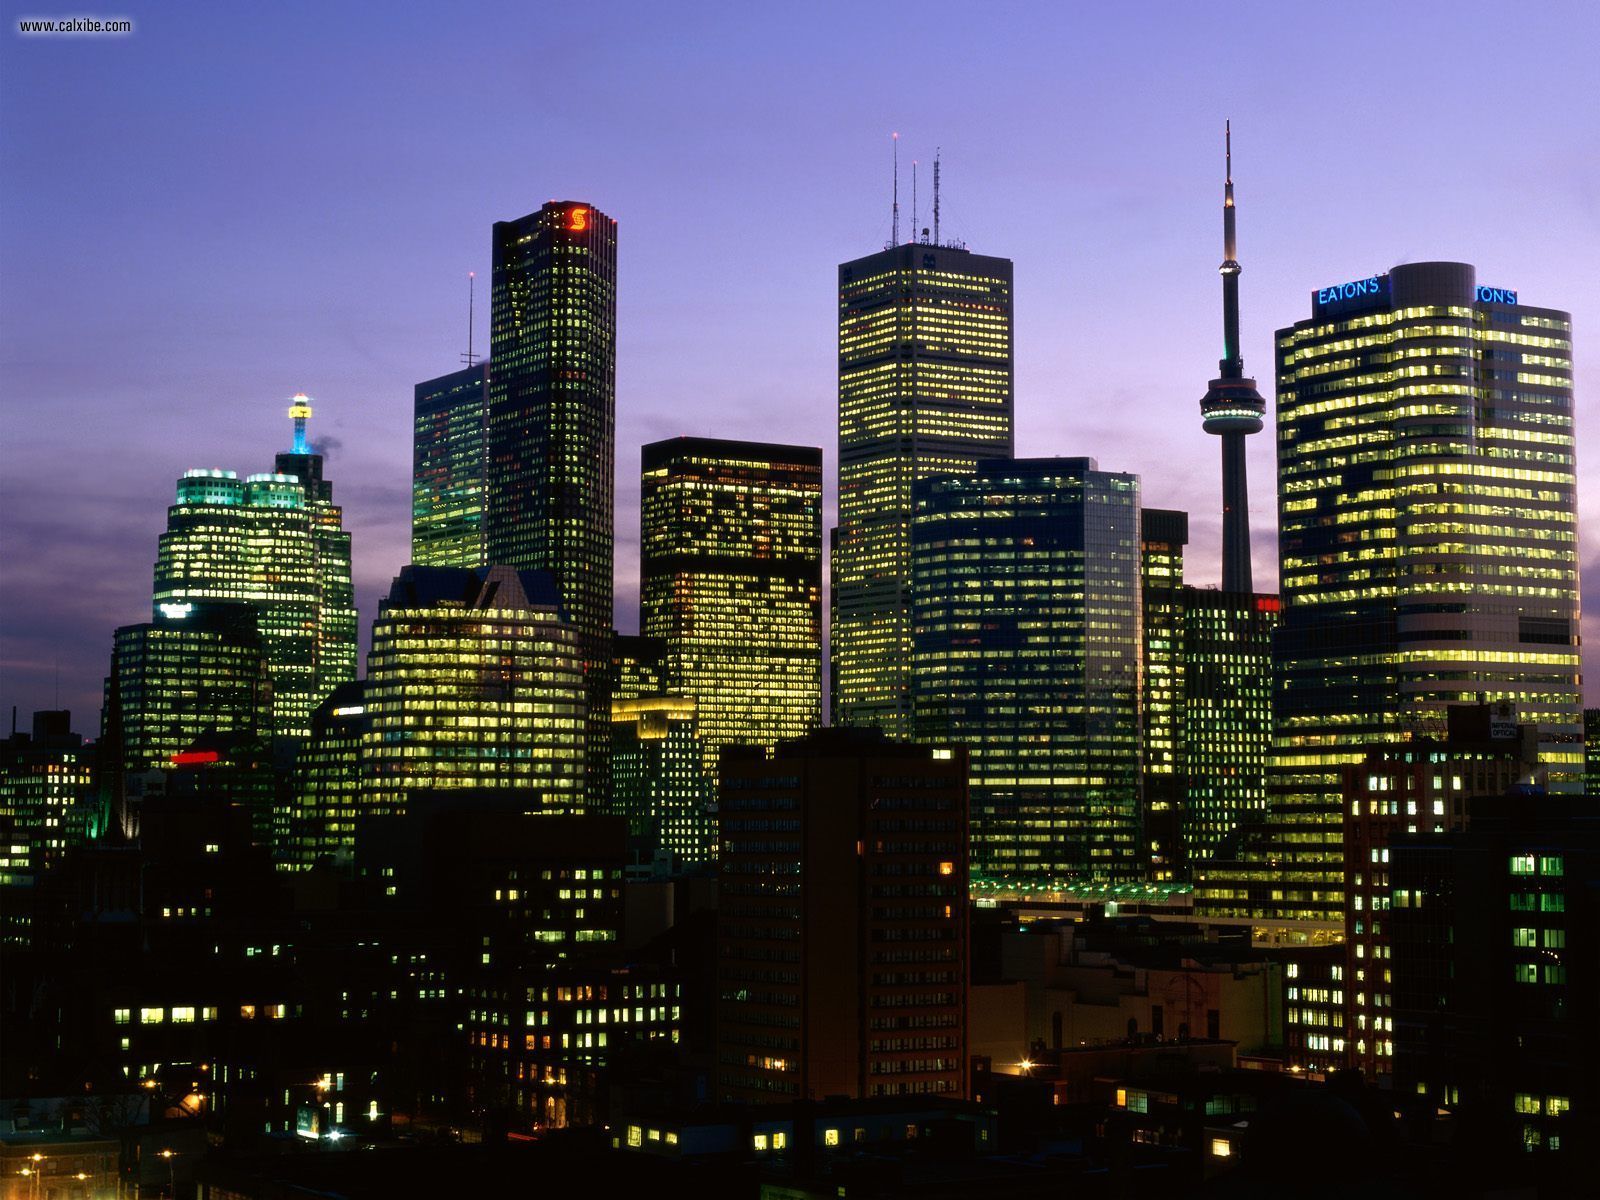 Buildings City Night Falls Over Toronto Ontario Picture Nr